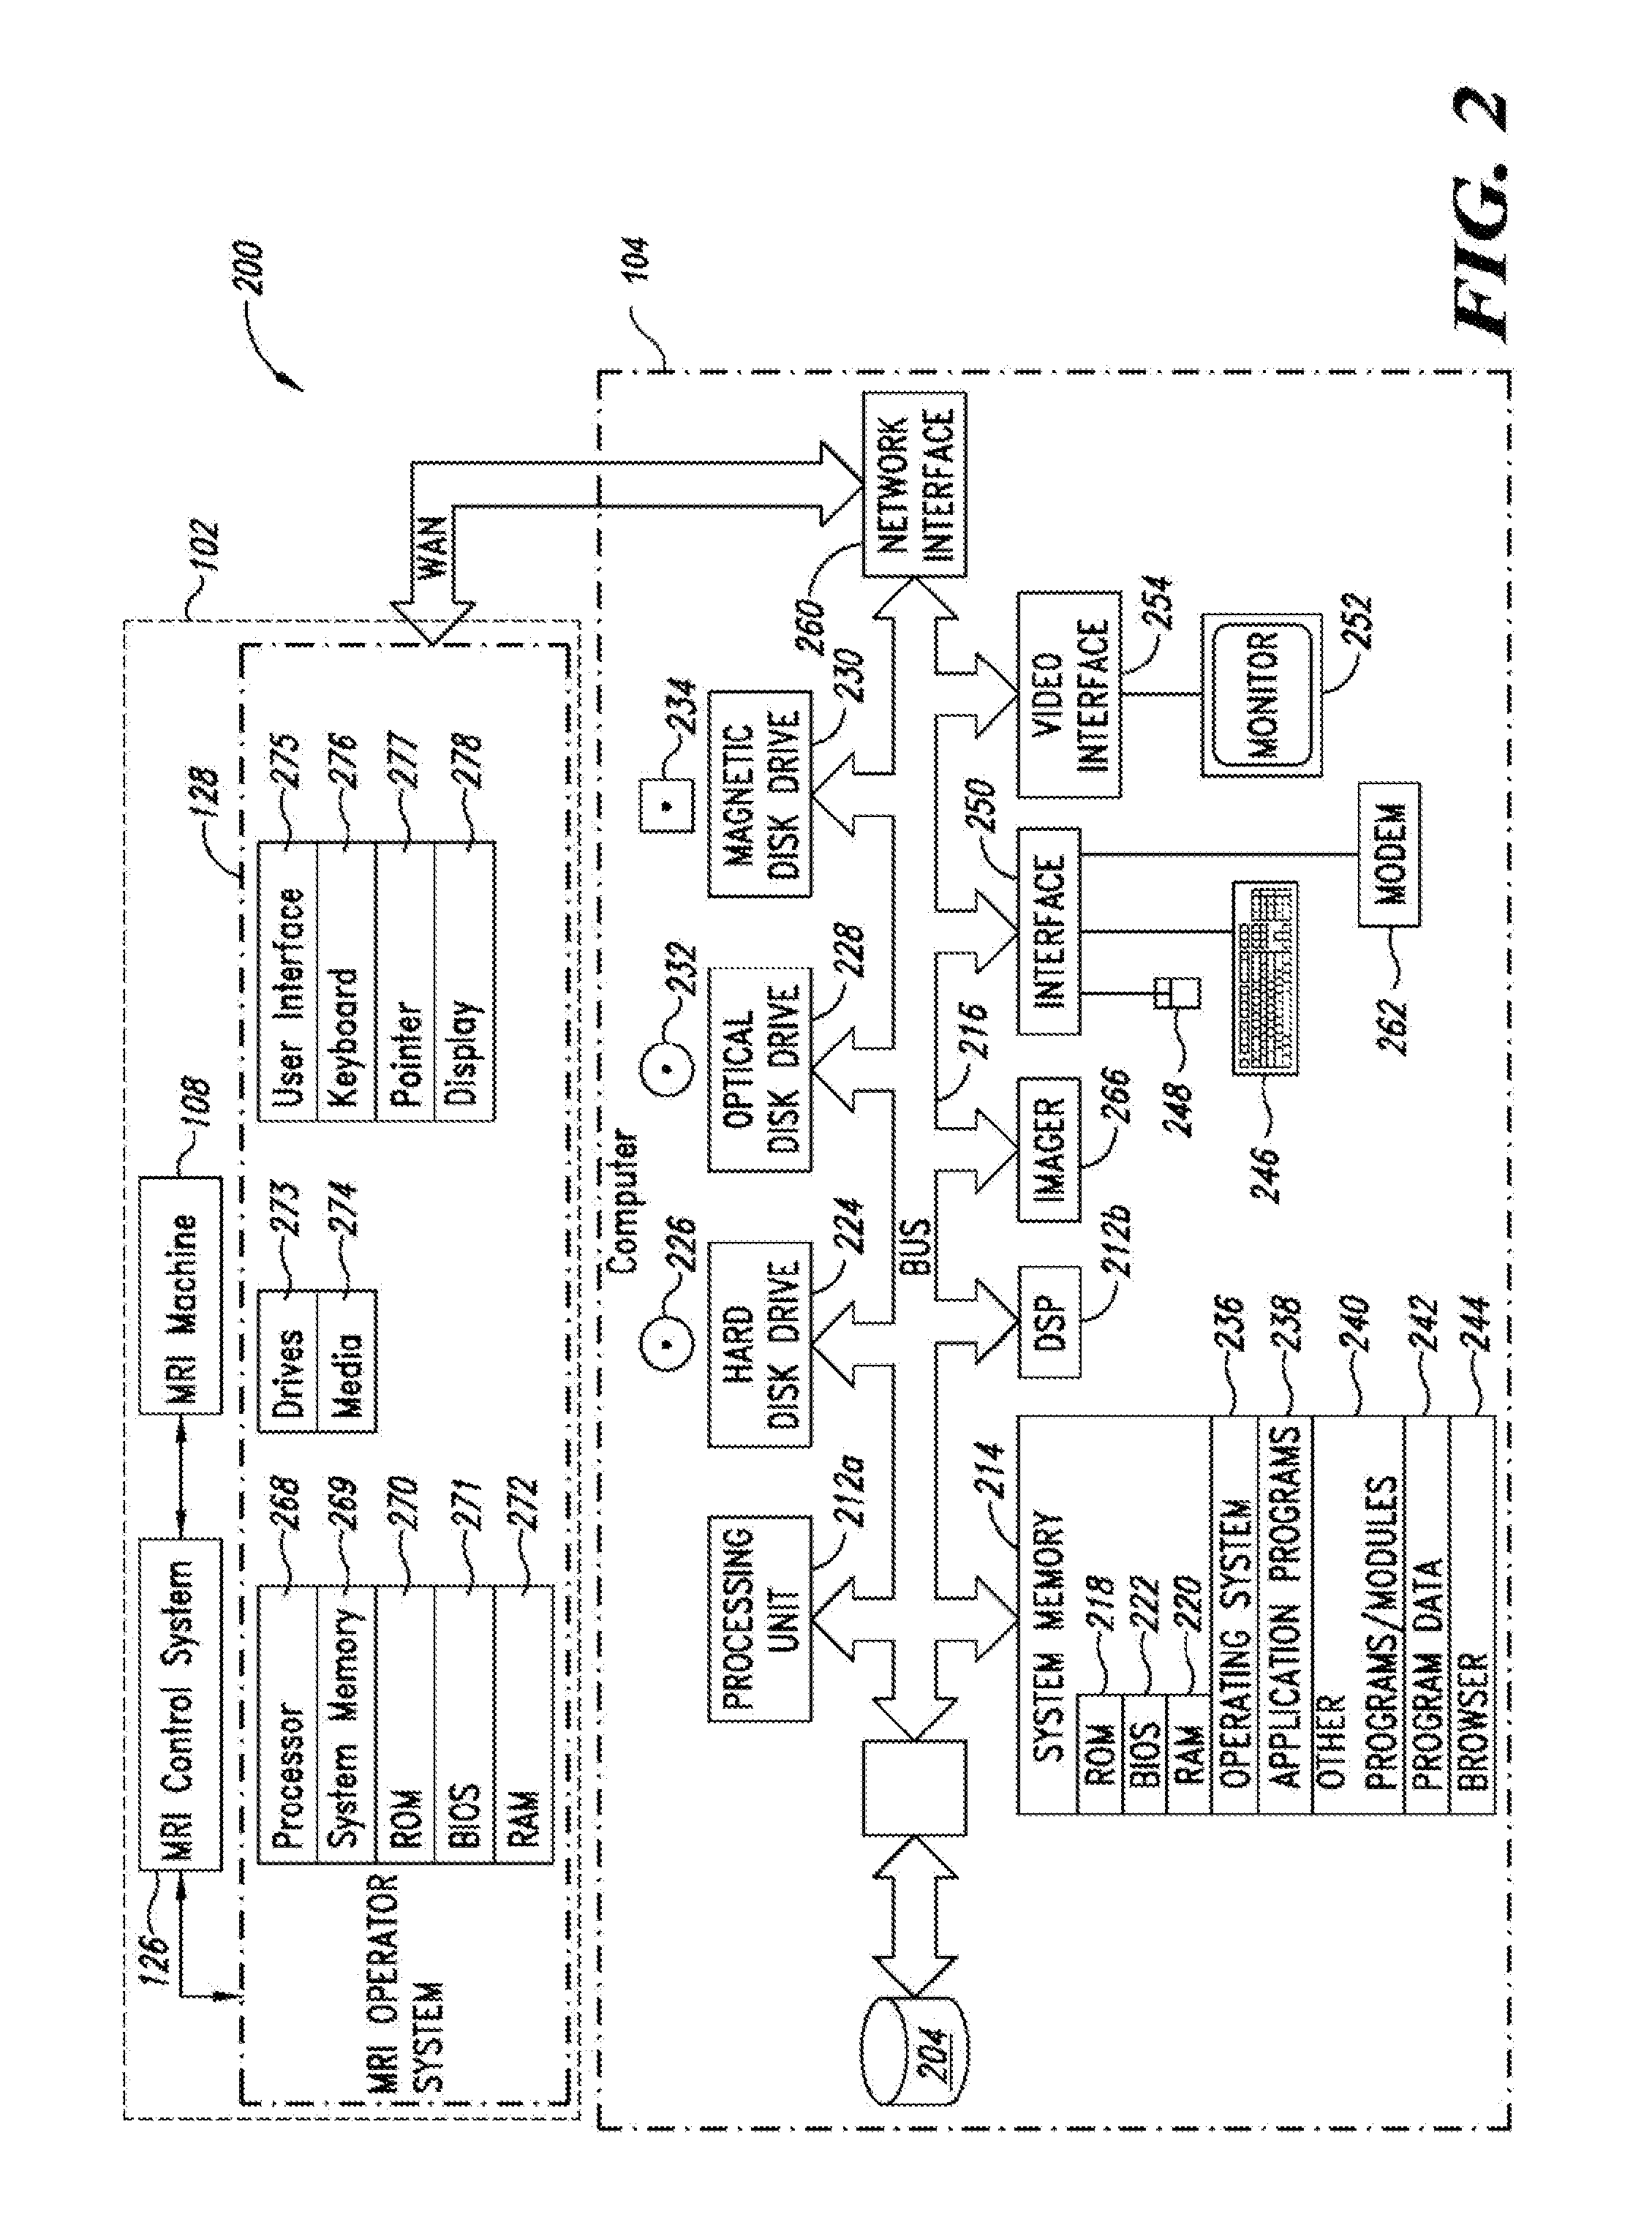 Apparatus, methods and articles for four dimensional (4D) flow magnetic resonance imaging